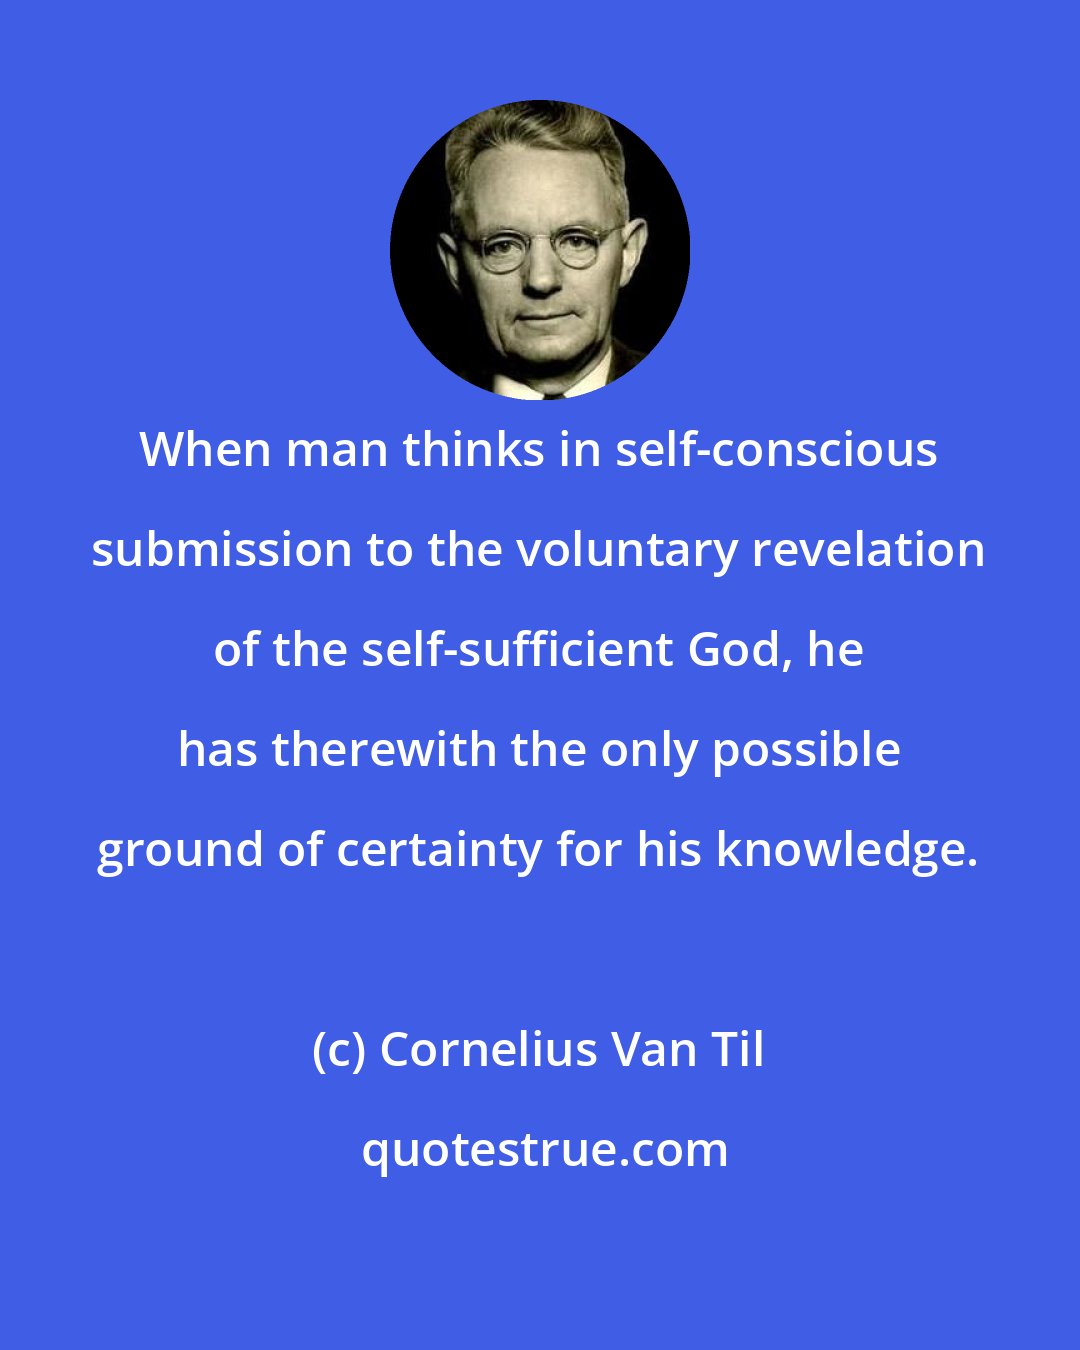 Cornelius Van Til: When man thinks in self-conscious submission to the voluntary revelation of the self-sufficient God, he has therewith the only possible ground of certainty for his knowledge.